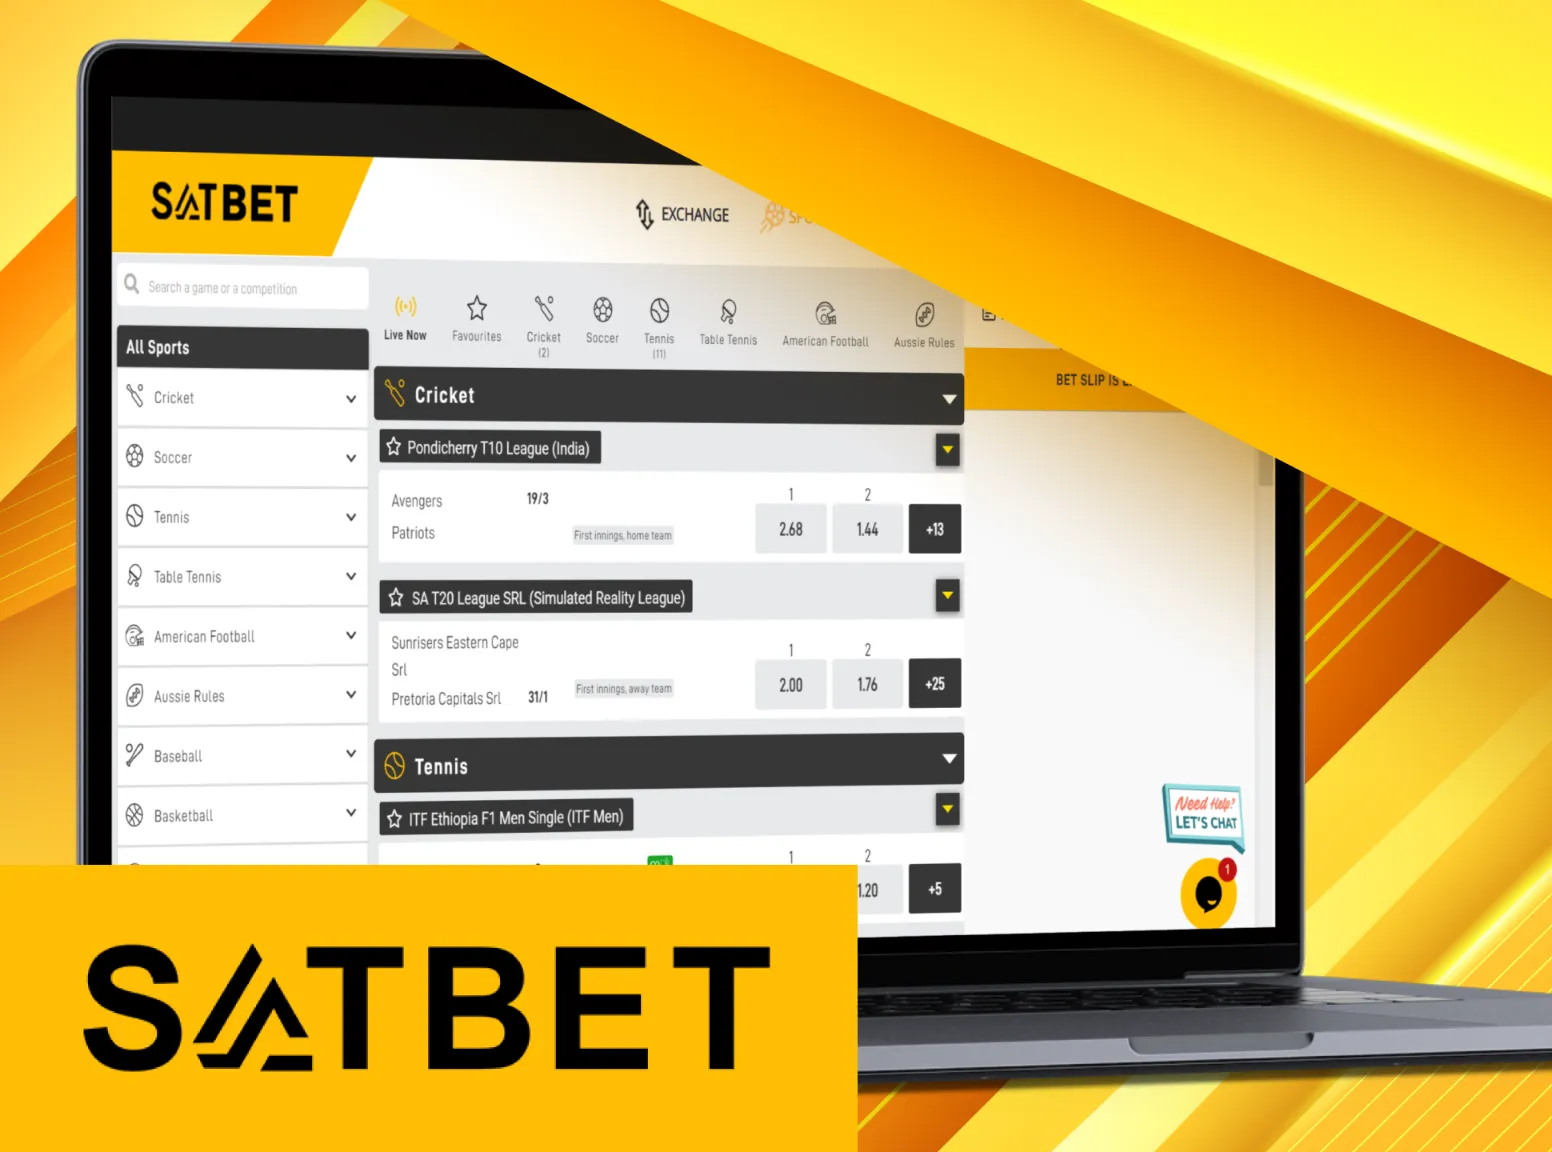 Install Satbet PC client and start making bets.